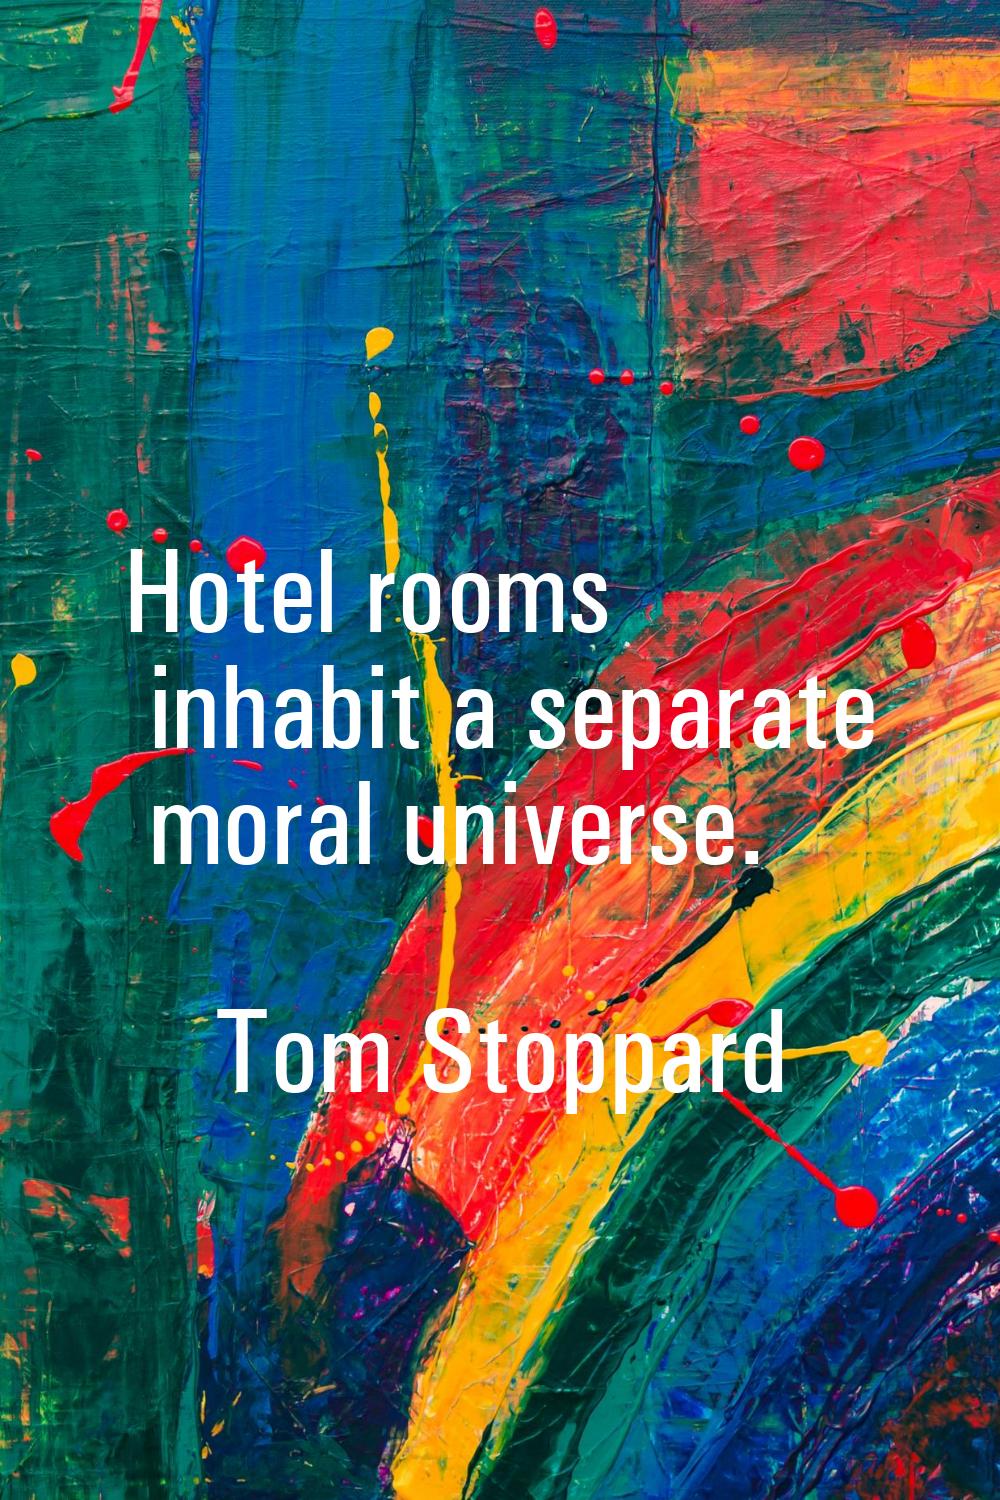 Hotel rooms inhabit a separate moral universe.